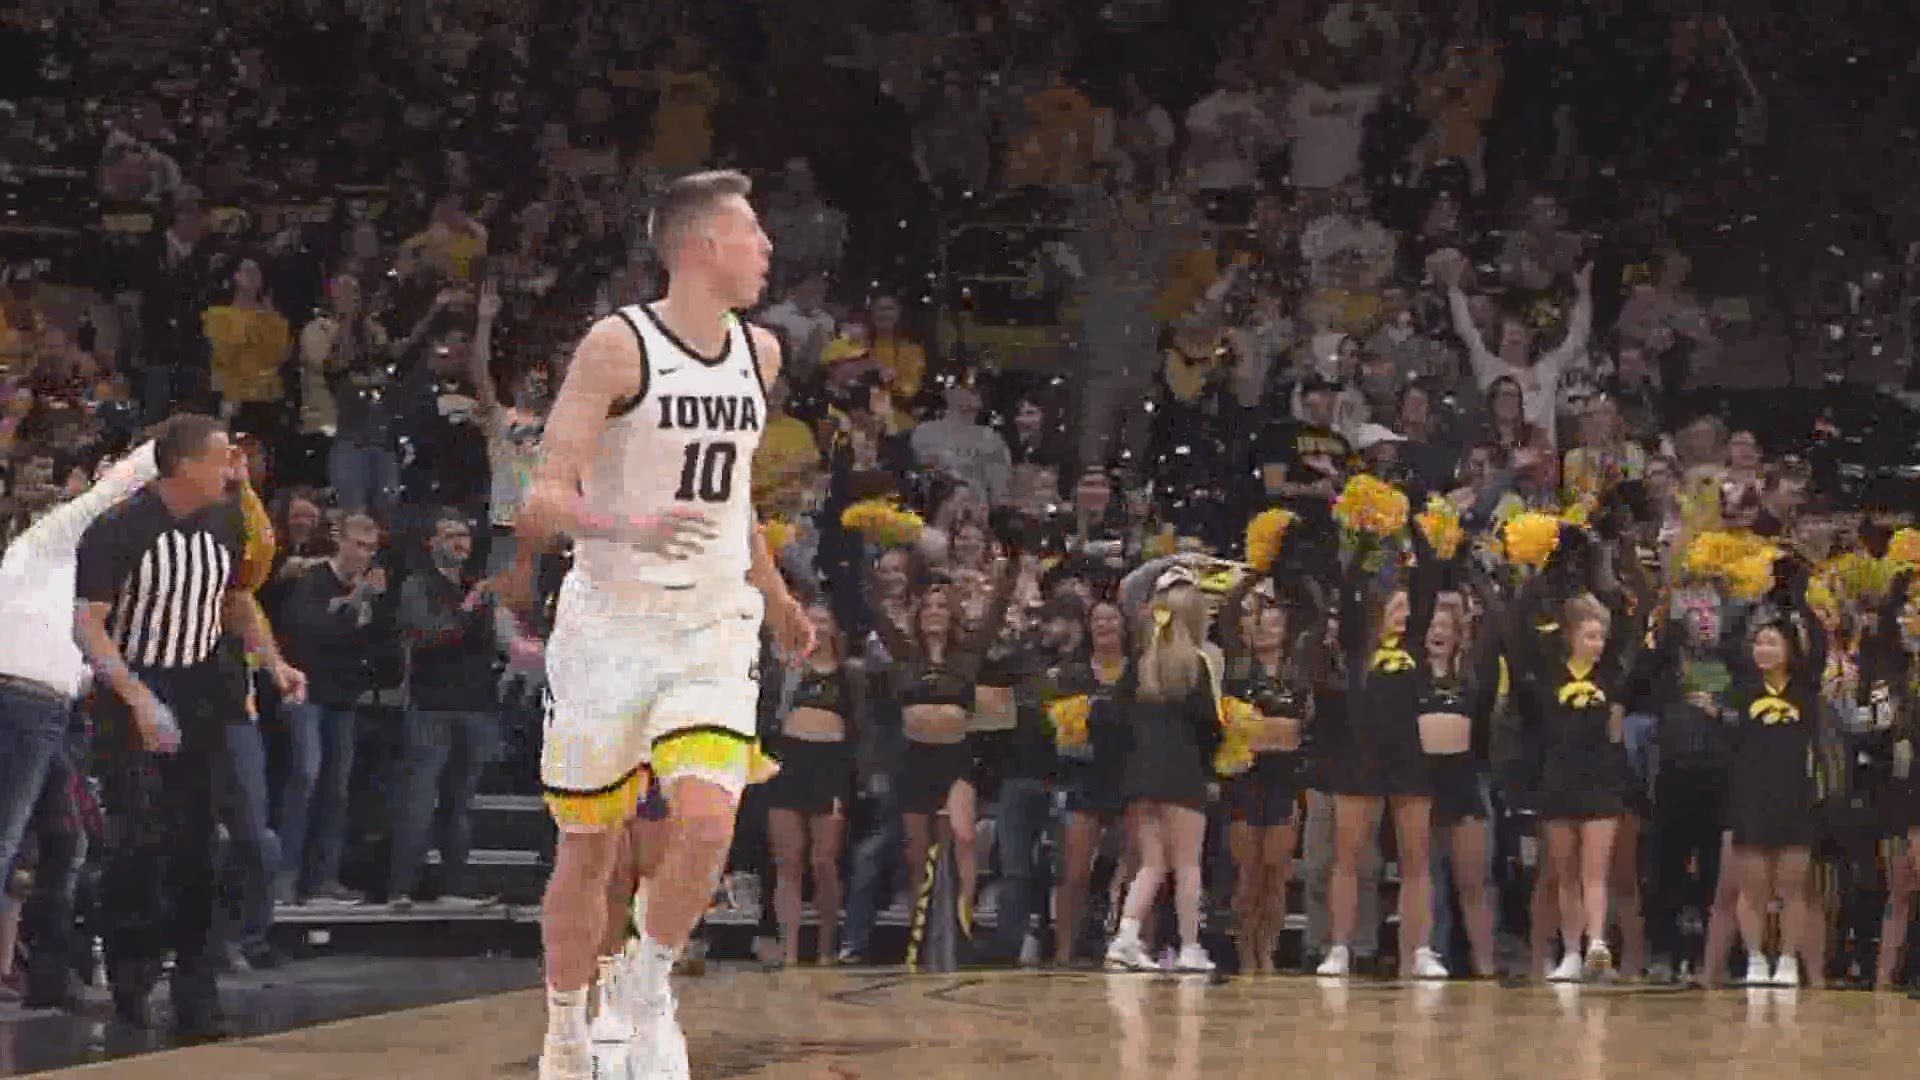 Joe Wieskamp is returning to Iowa City for another season of Hawkeye hoops. That means expectations will remain high on Iowa